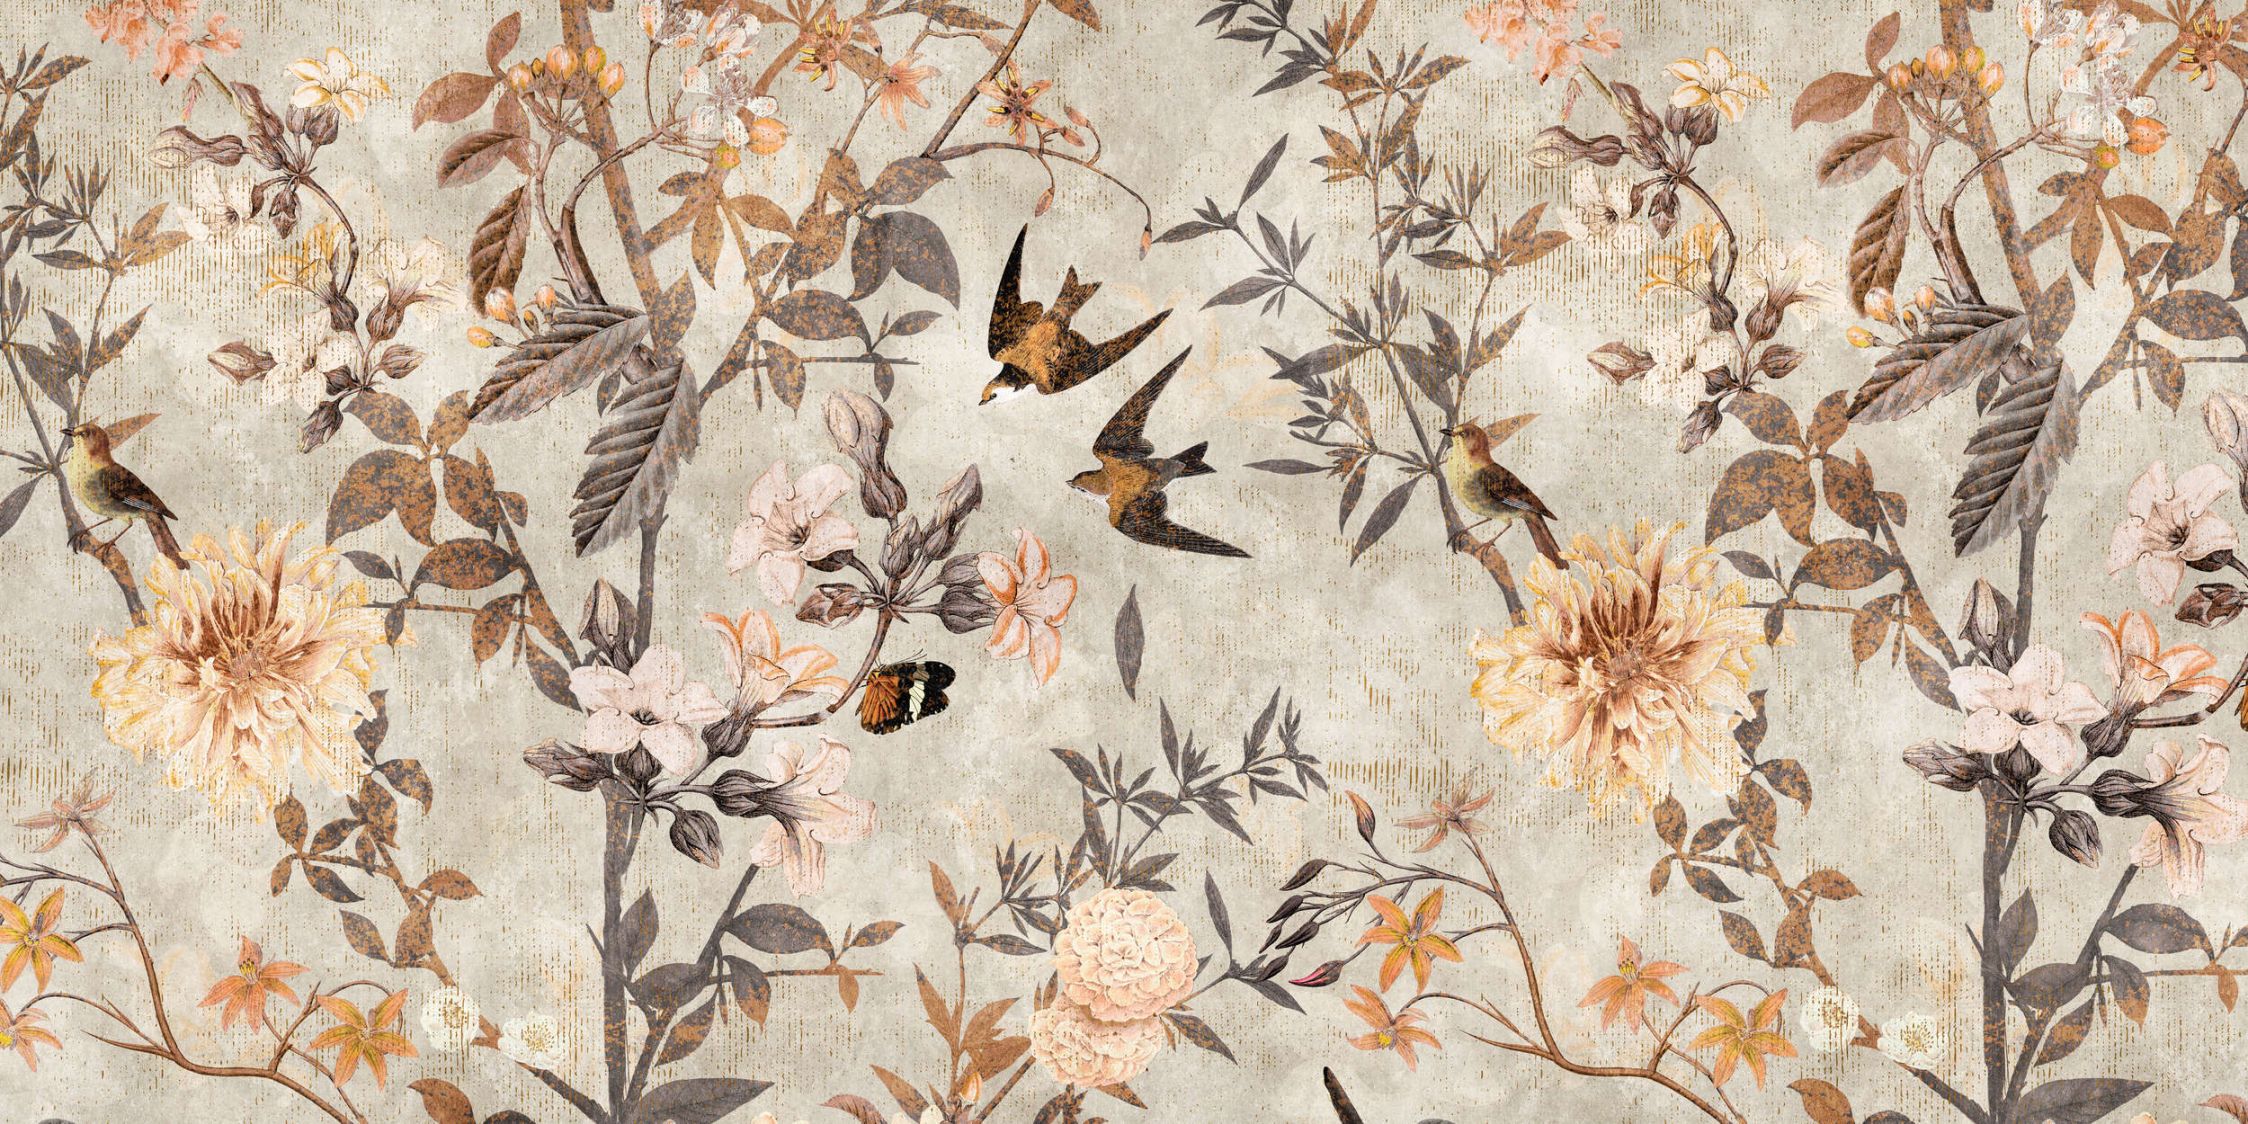             Photo wallpaper »eden« - Vintage style birds & flowers - Lightly textured non-woven fabric
        